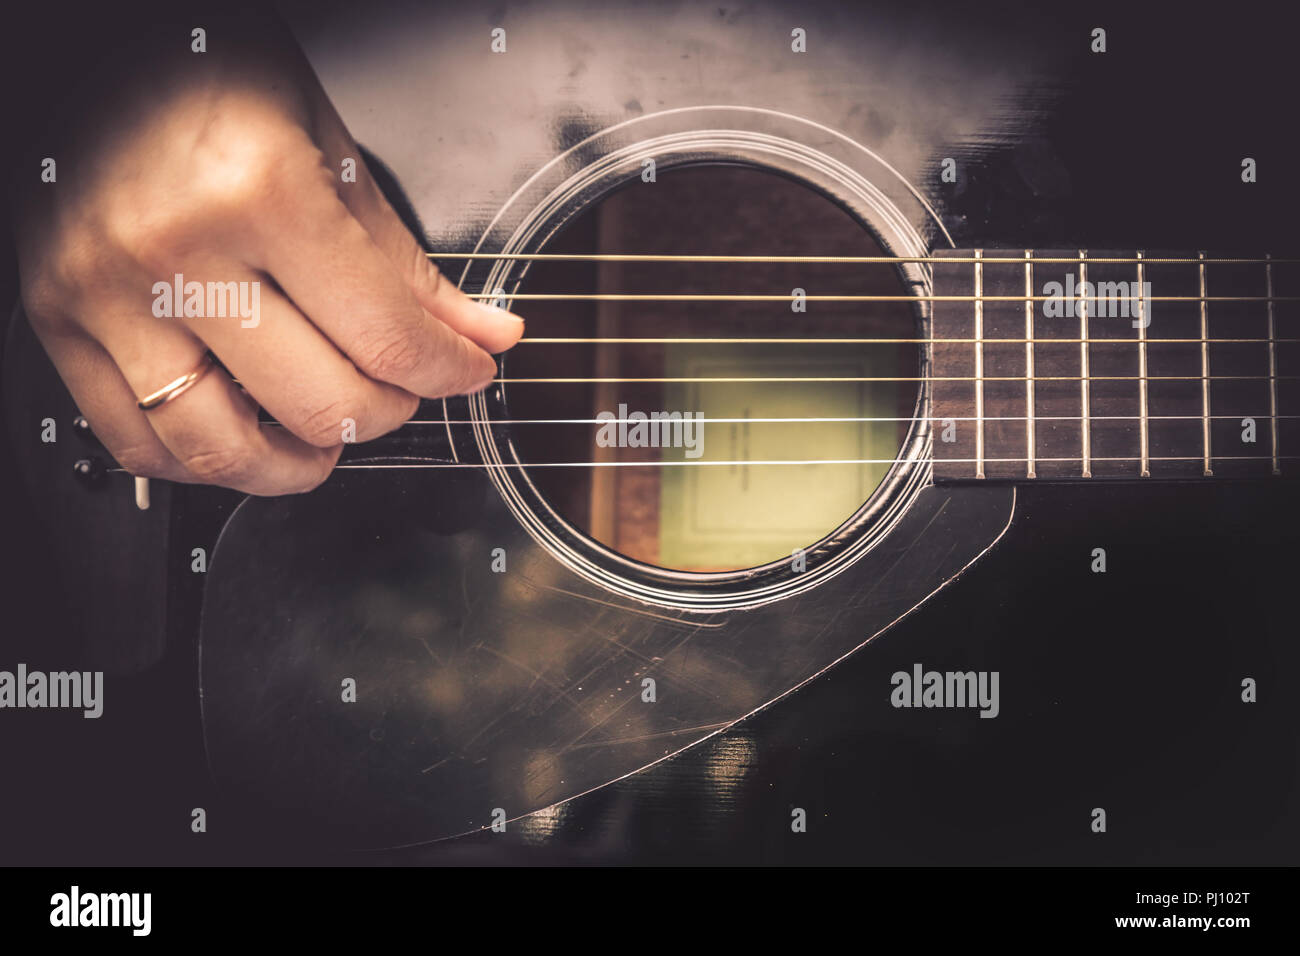 Guitarist Hand playing on acoustic guitar fretboard vintage style Stock Photo